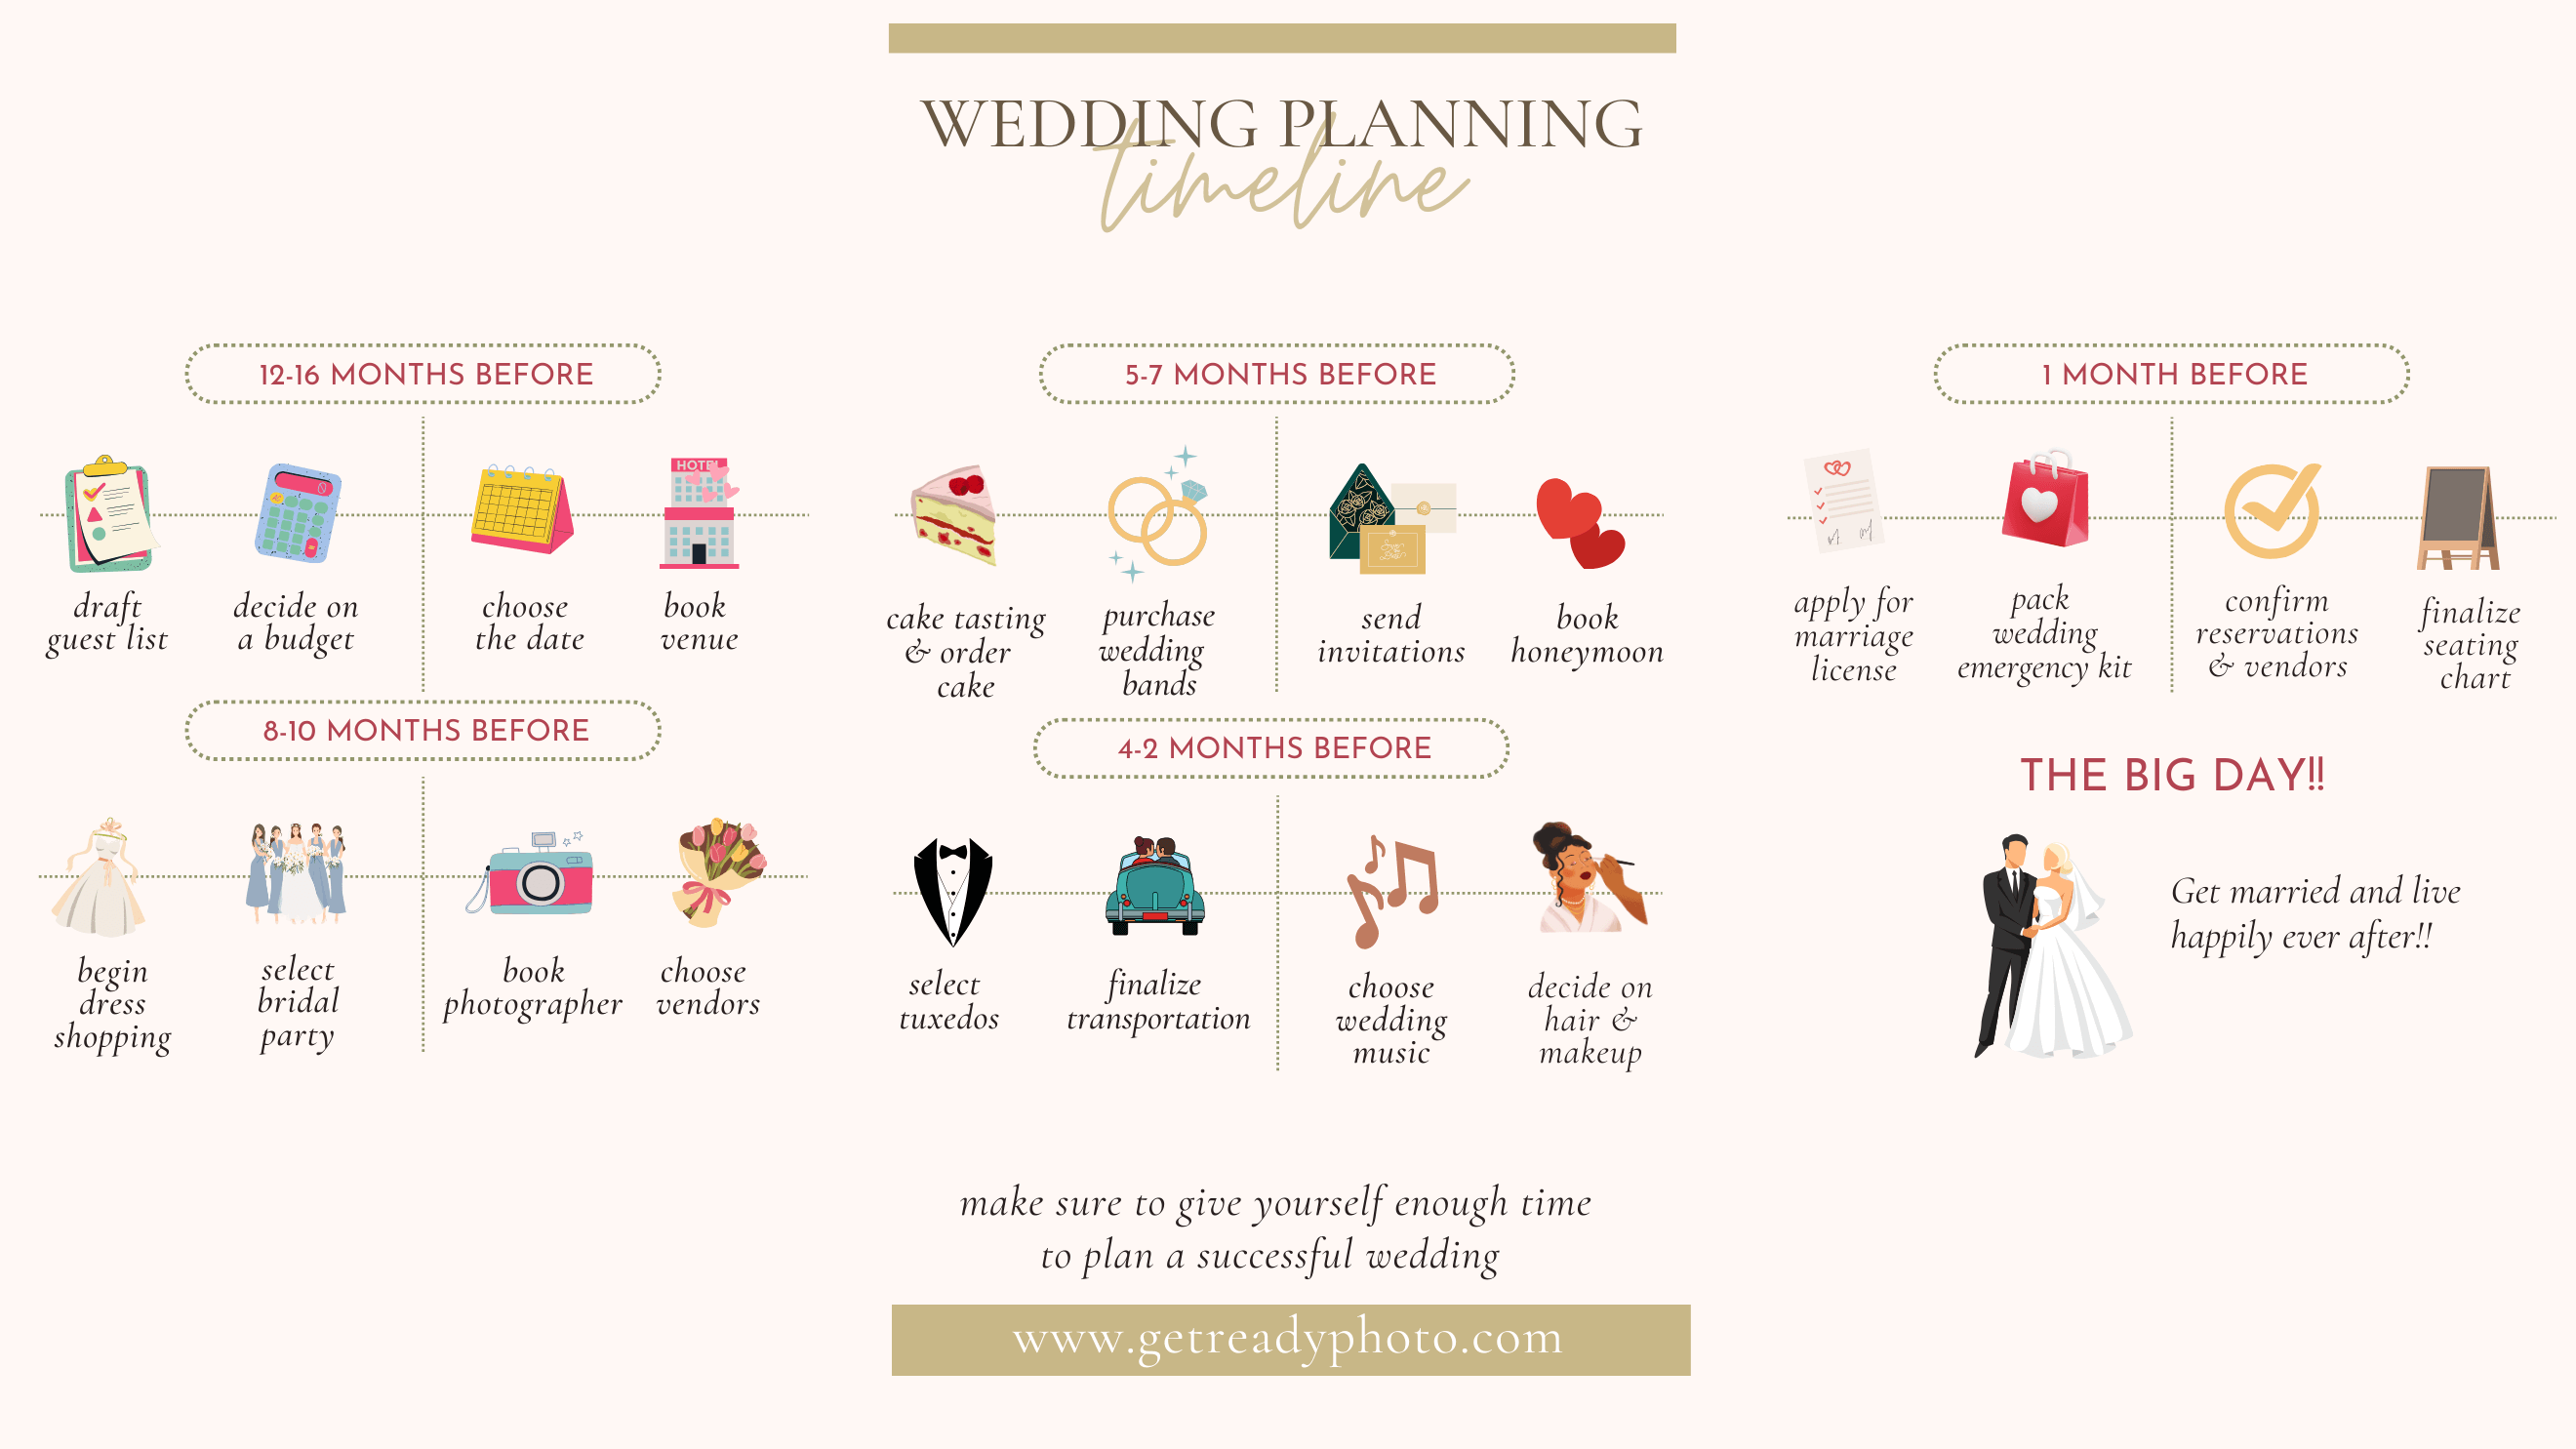 An elegant wedding planning timeline infographic depicting key milestones from engagement to the big day. The visually appealing graphic outlines stages such as setting the date, choosing a venue, selecting attire, sending invitations, and other essential tasks in a chronological order.